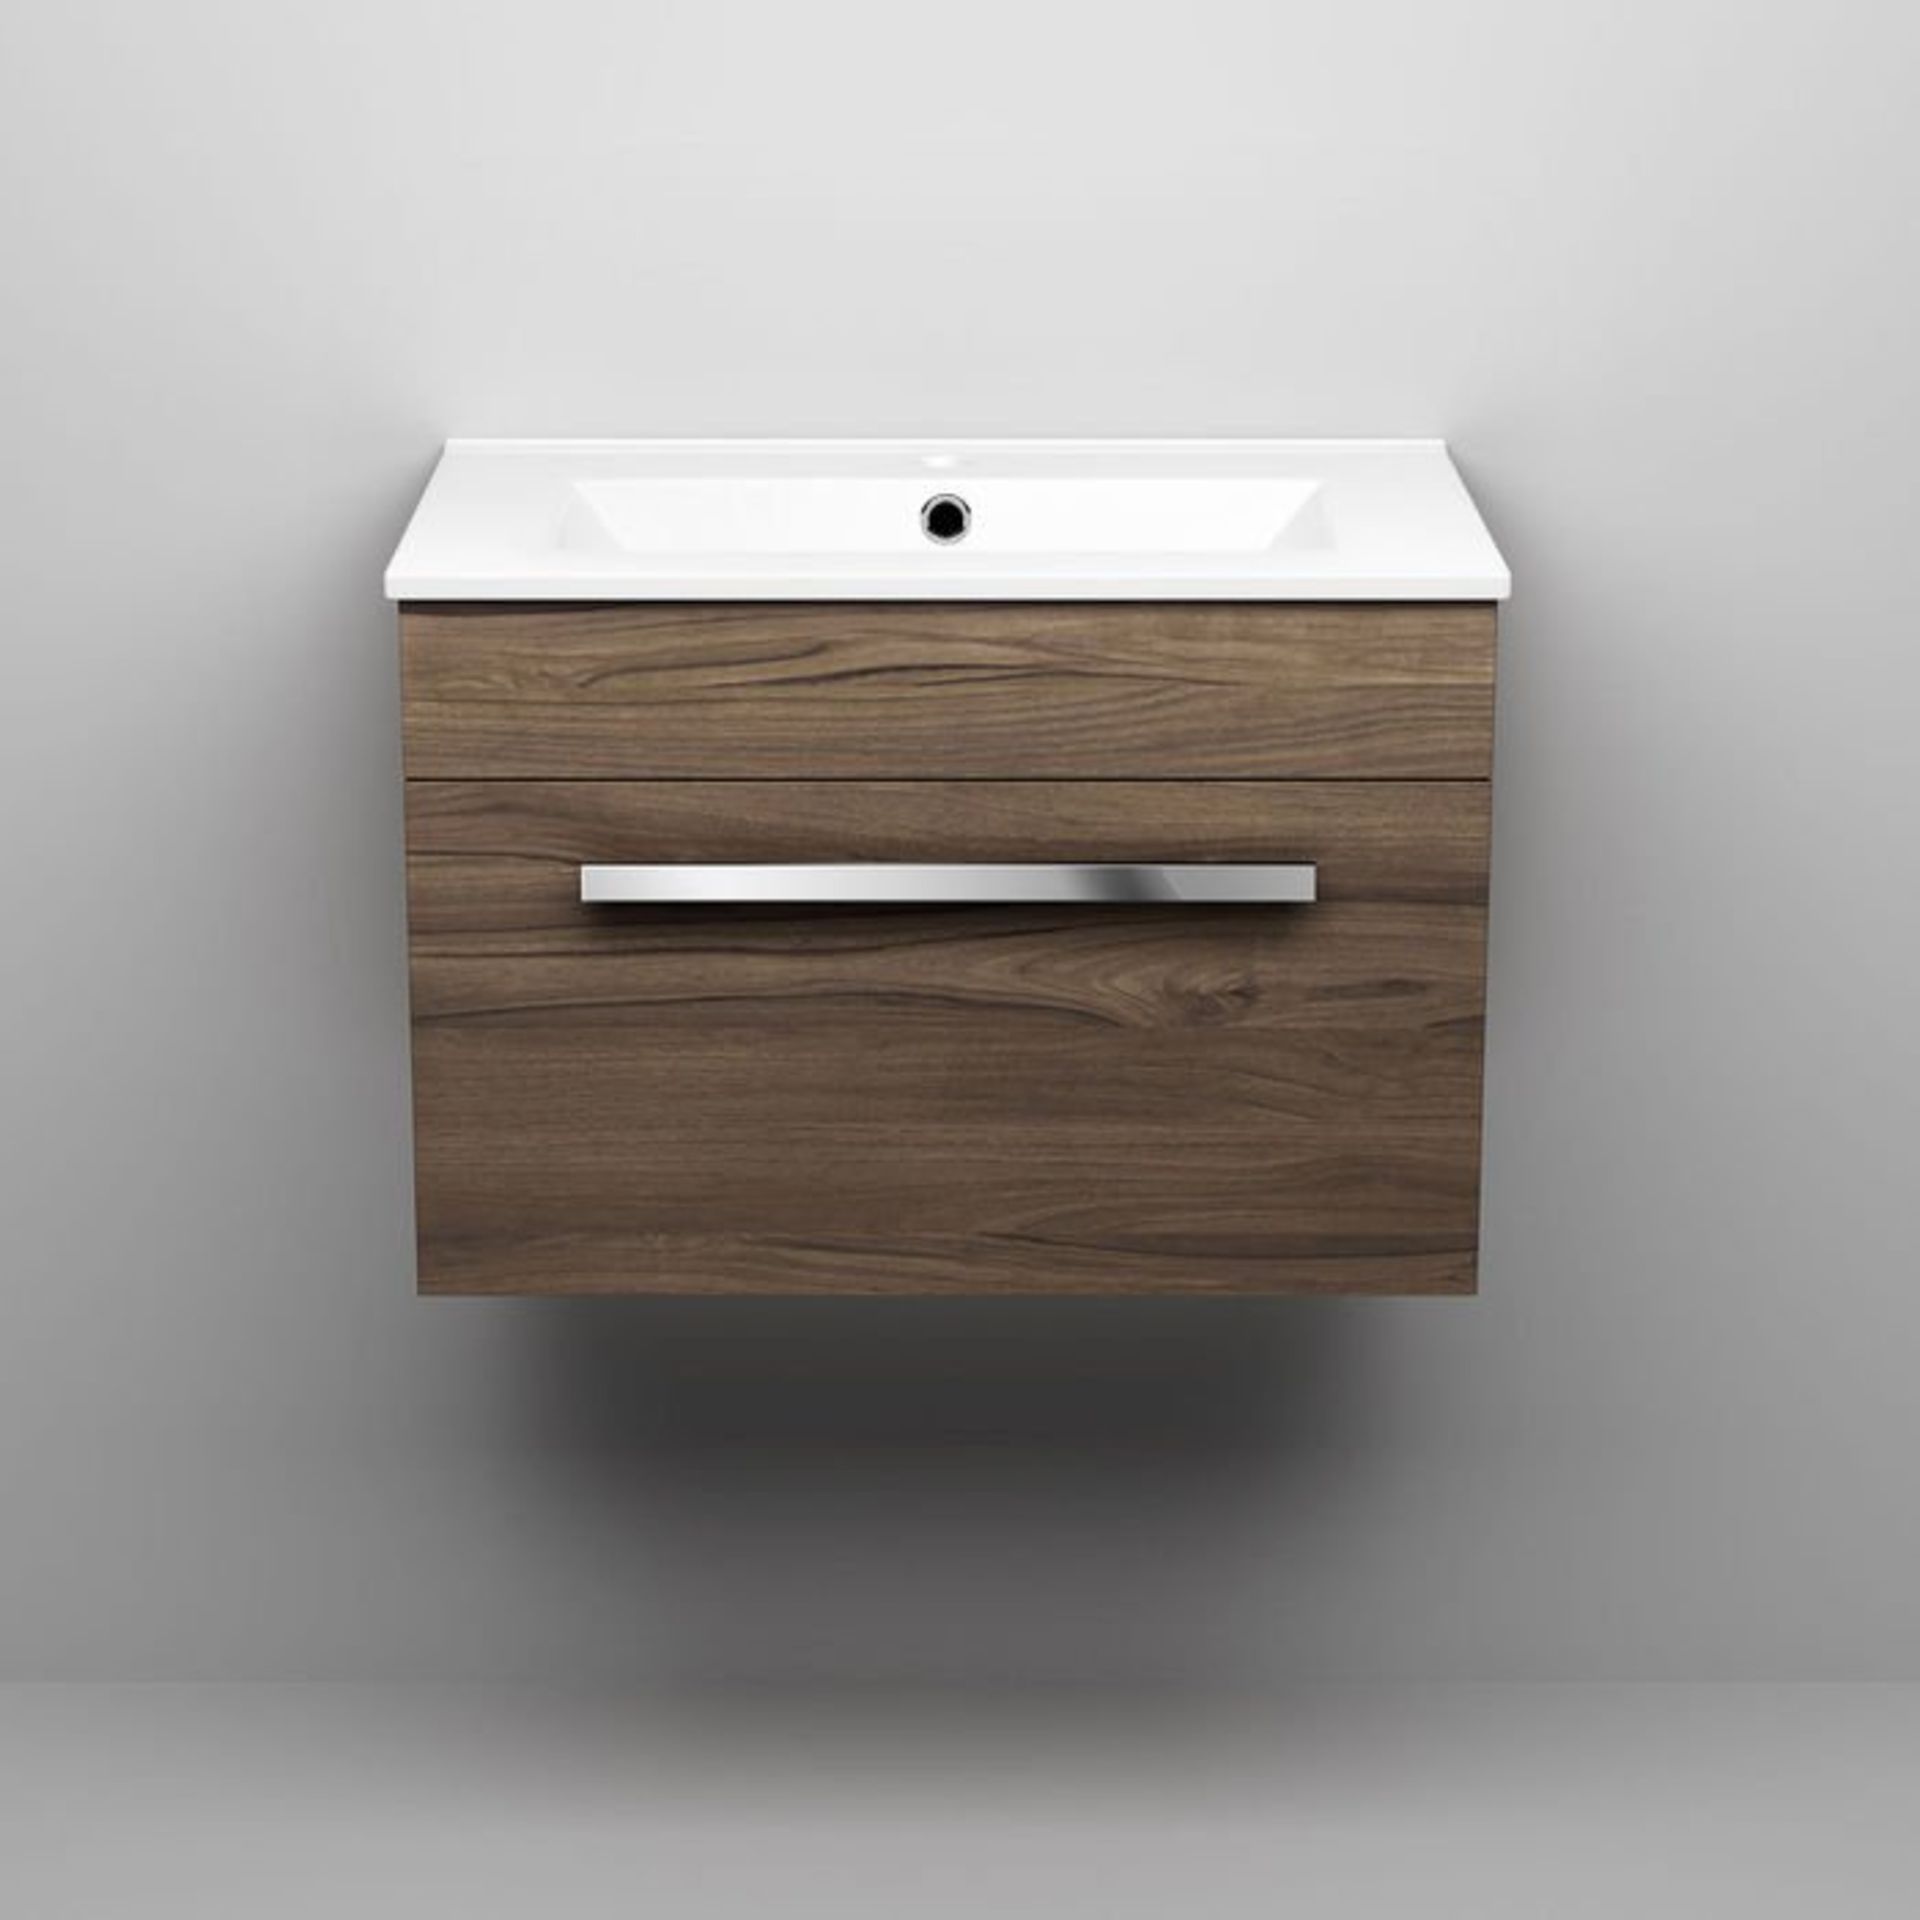 (S57) 600mm Avon Walnut Effect Basin Cabinet - Wall Hung RRP £449.99. COMES COMPLETE WITH BASIN. - Image 3 of 3